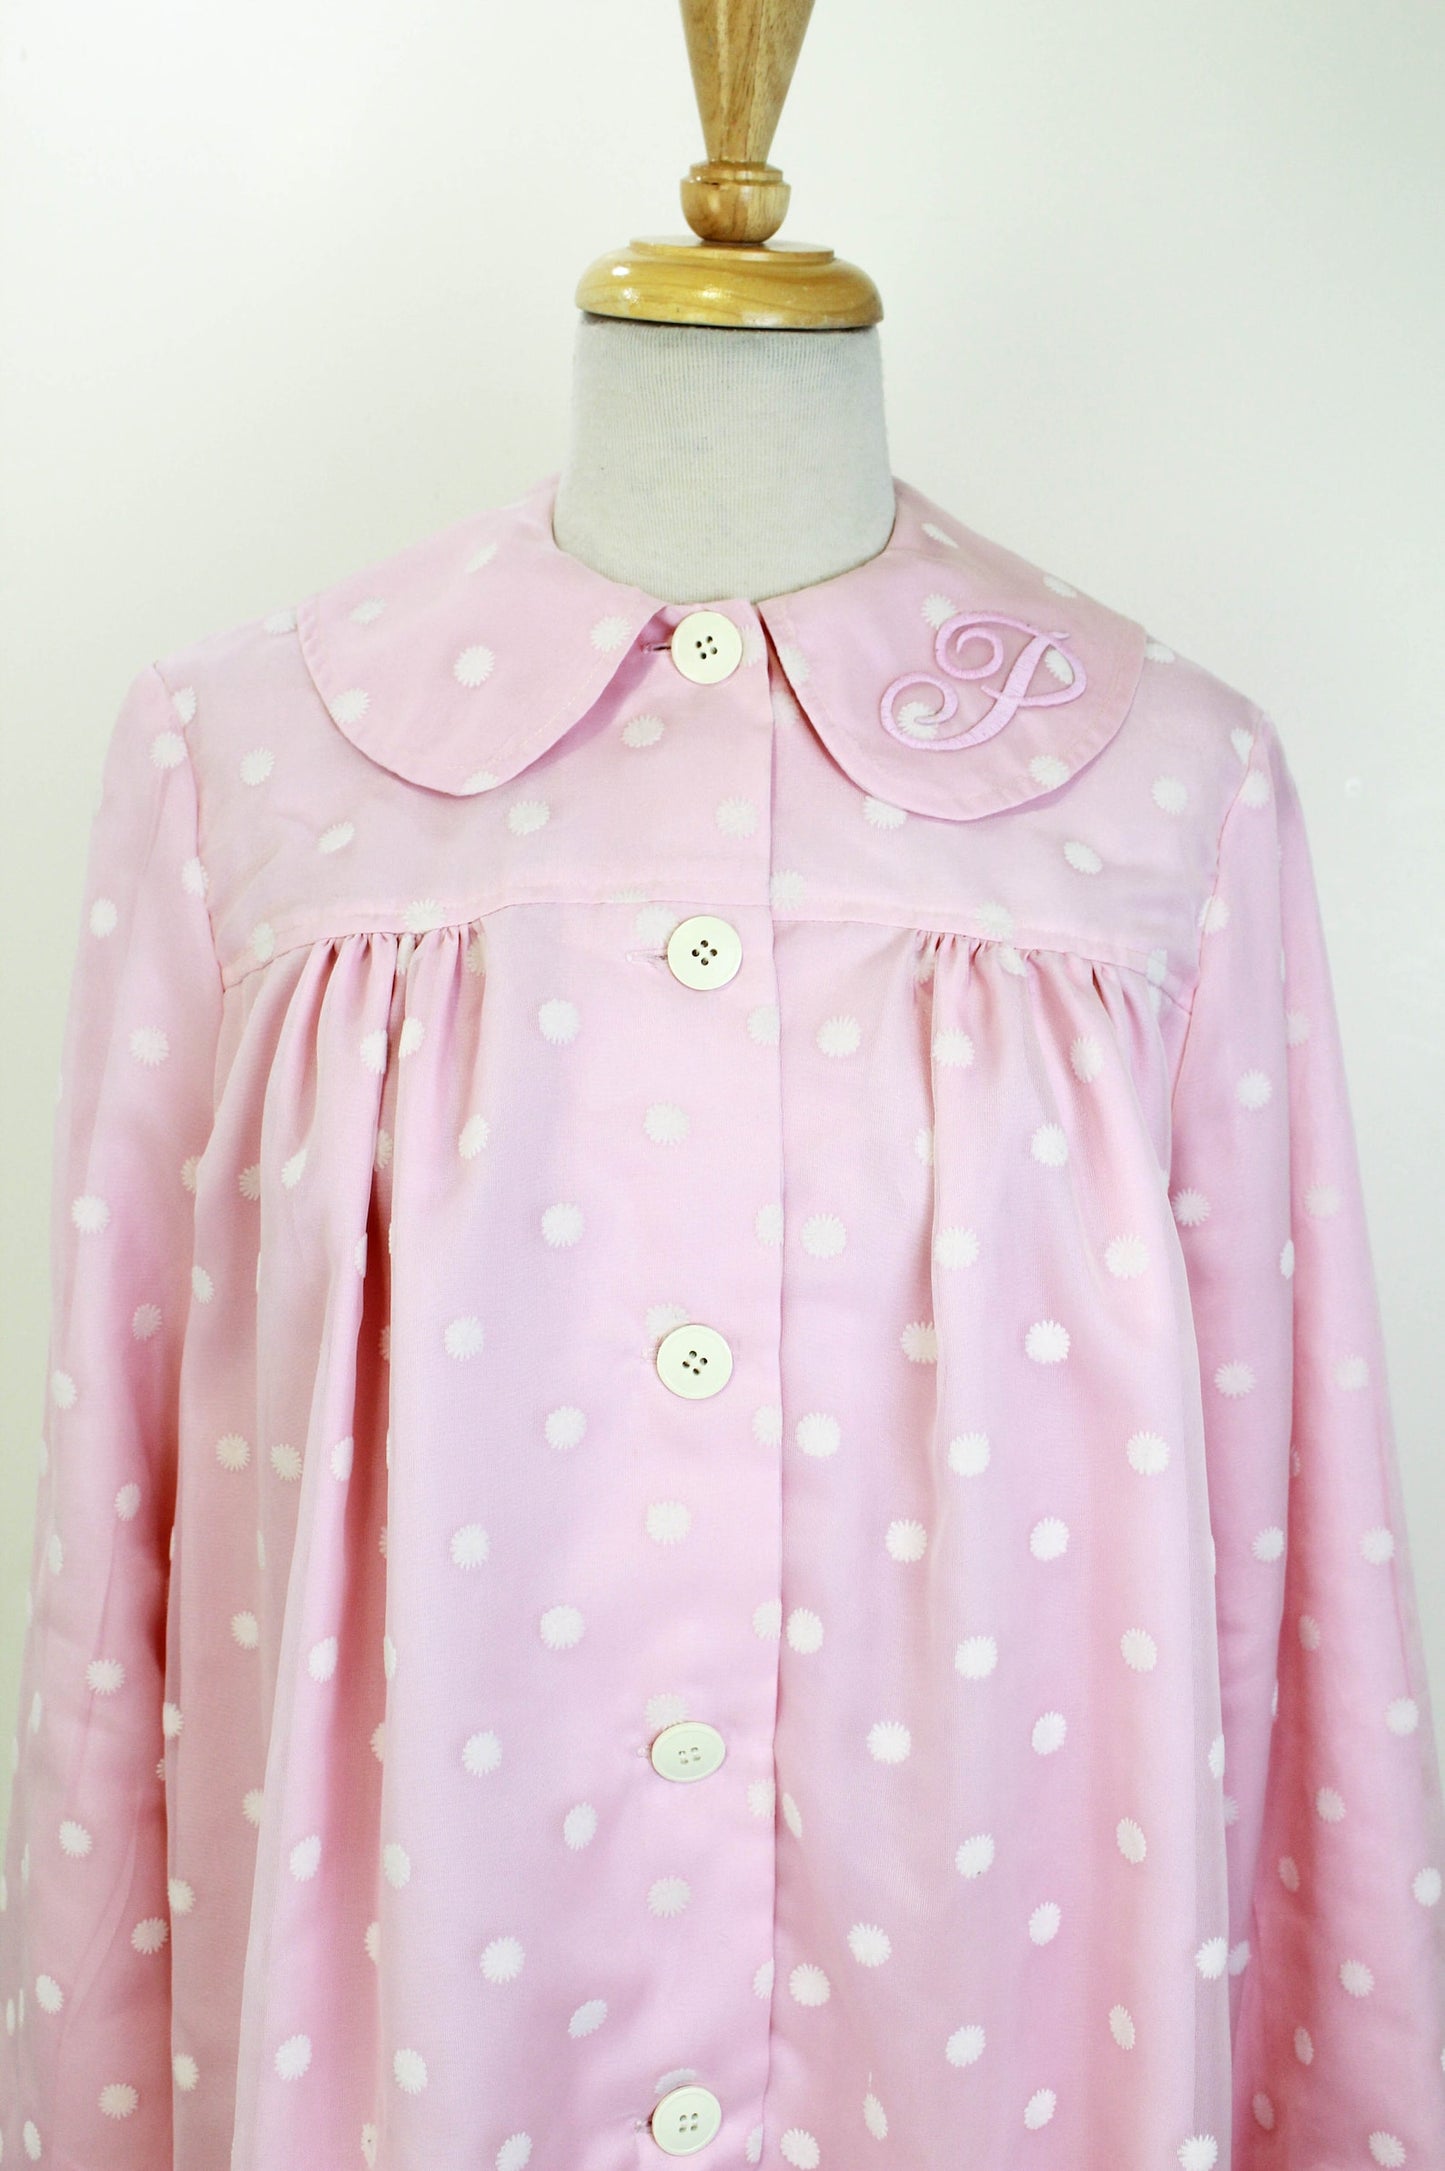 60s-Style Pink Flower Dress Jacket, Pinky's Uniform from Hairspray, Embroidered P Initial